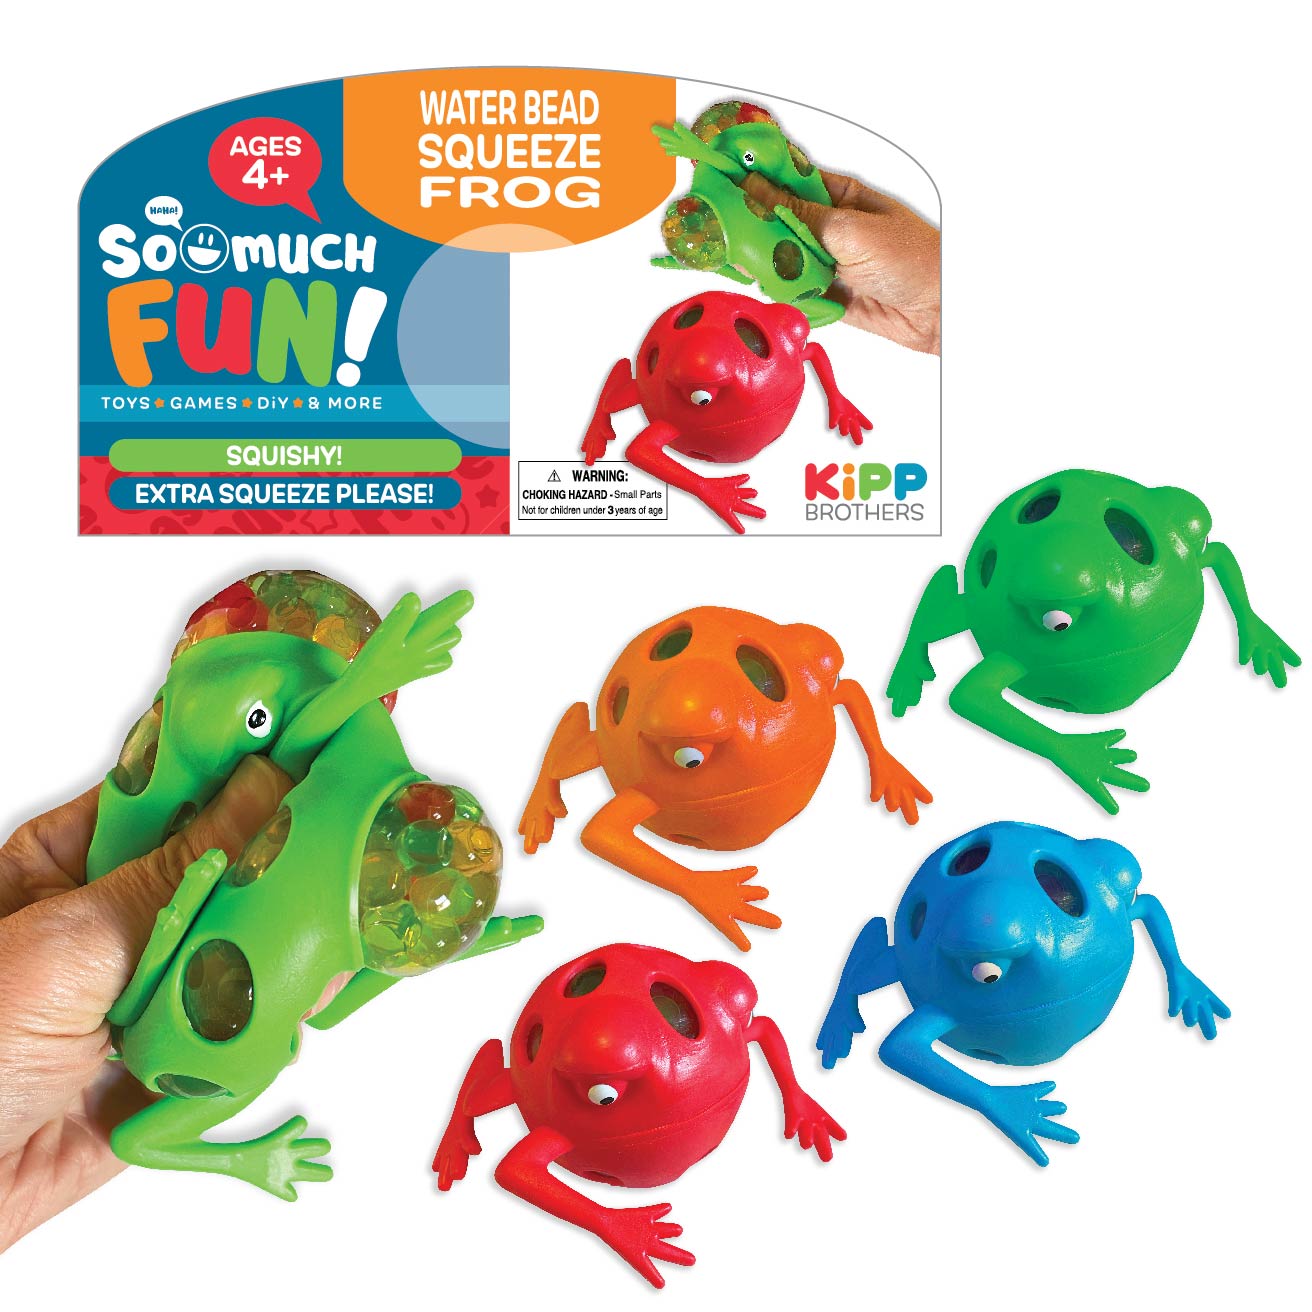 Squish & Squeeze Frog Water Bead Ball Toy - 12 Pieces Per Pack